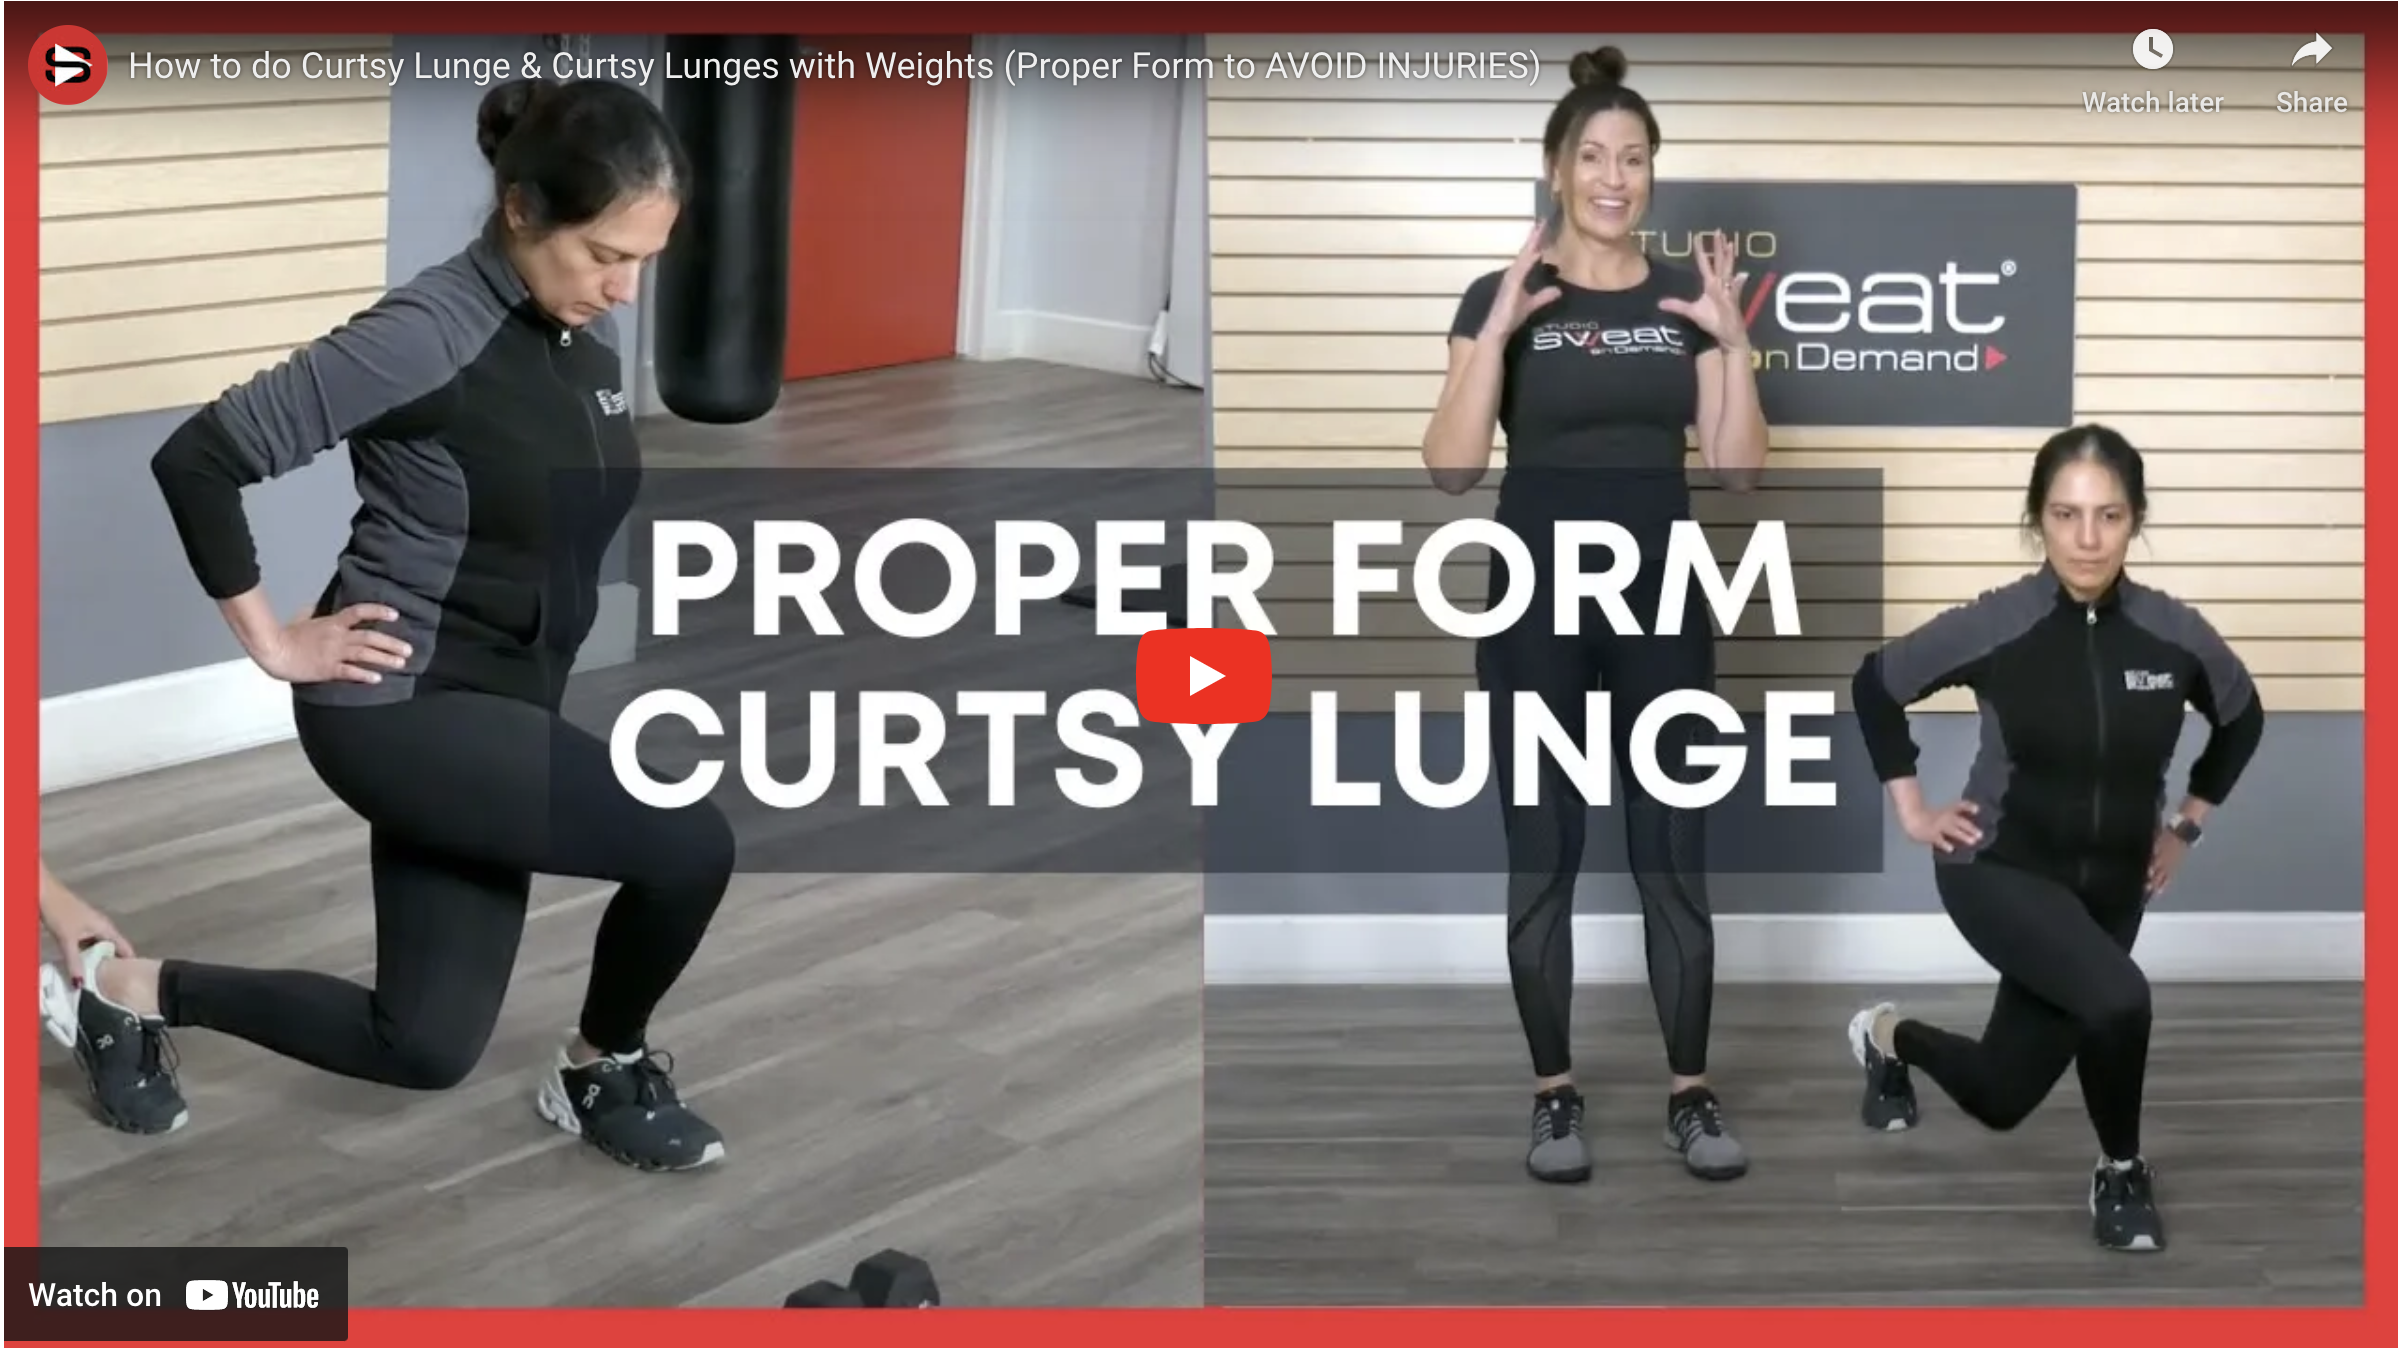 How to do Curtsy Lunge & Curtsy Lunges with Weights youtube